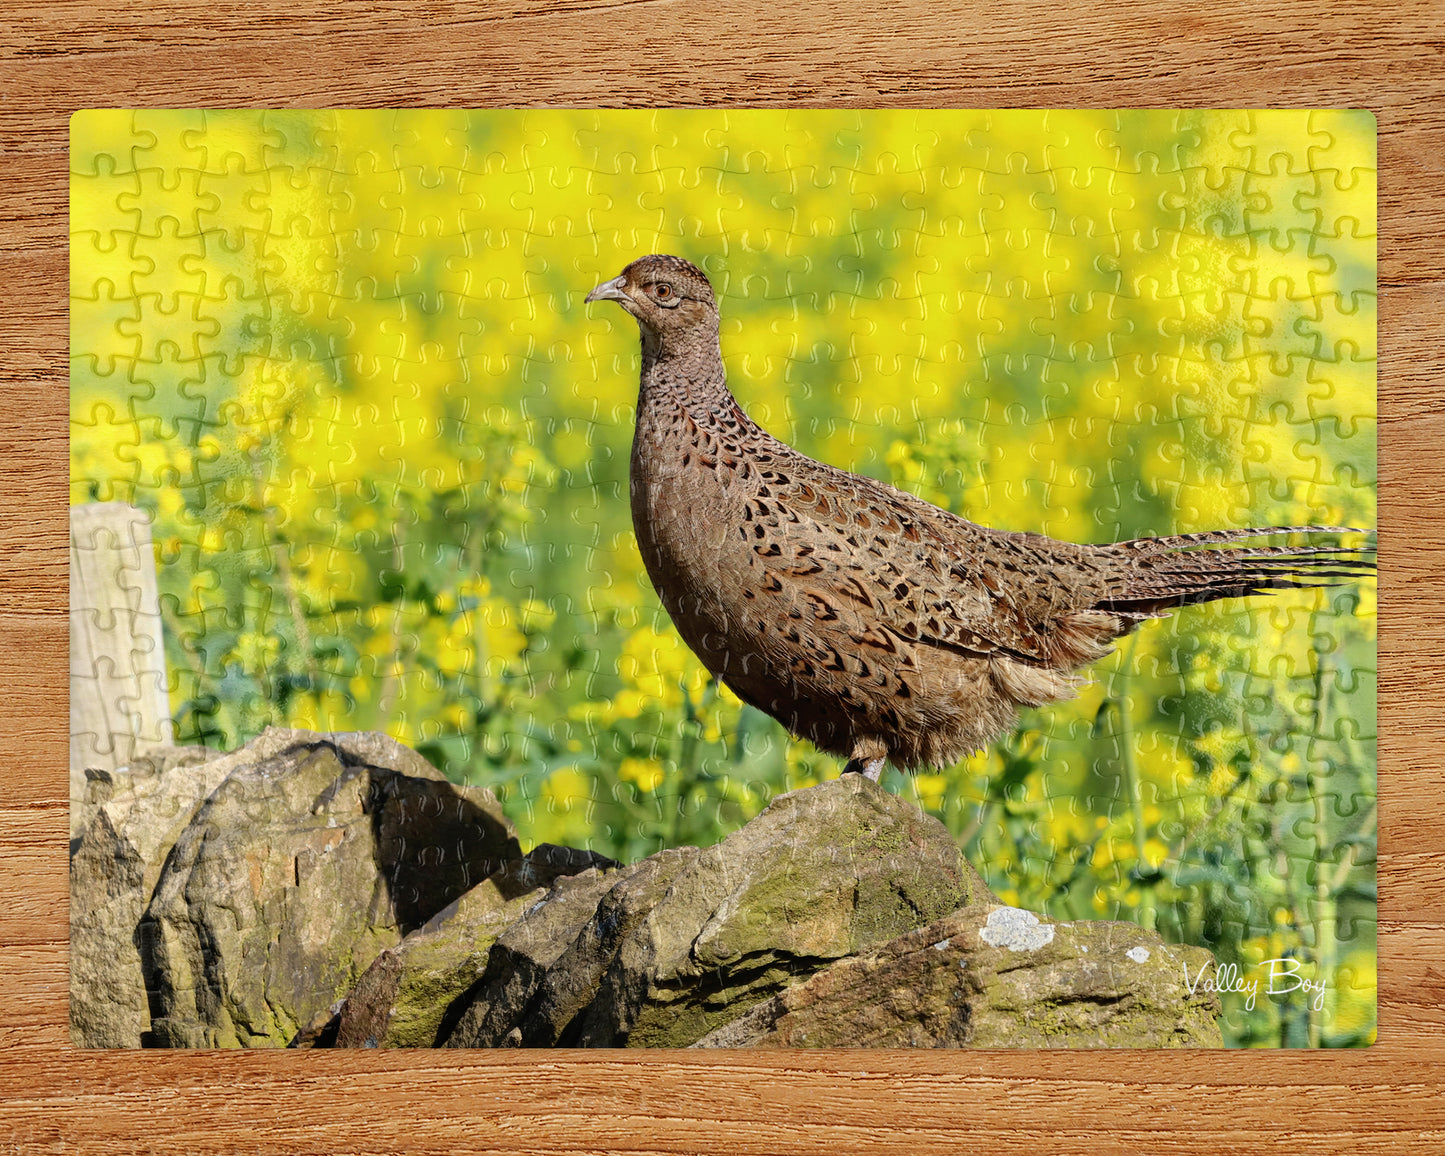 “Rebecca looking great in Yellow” Jigsaw Puzzle